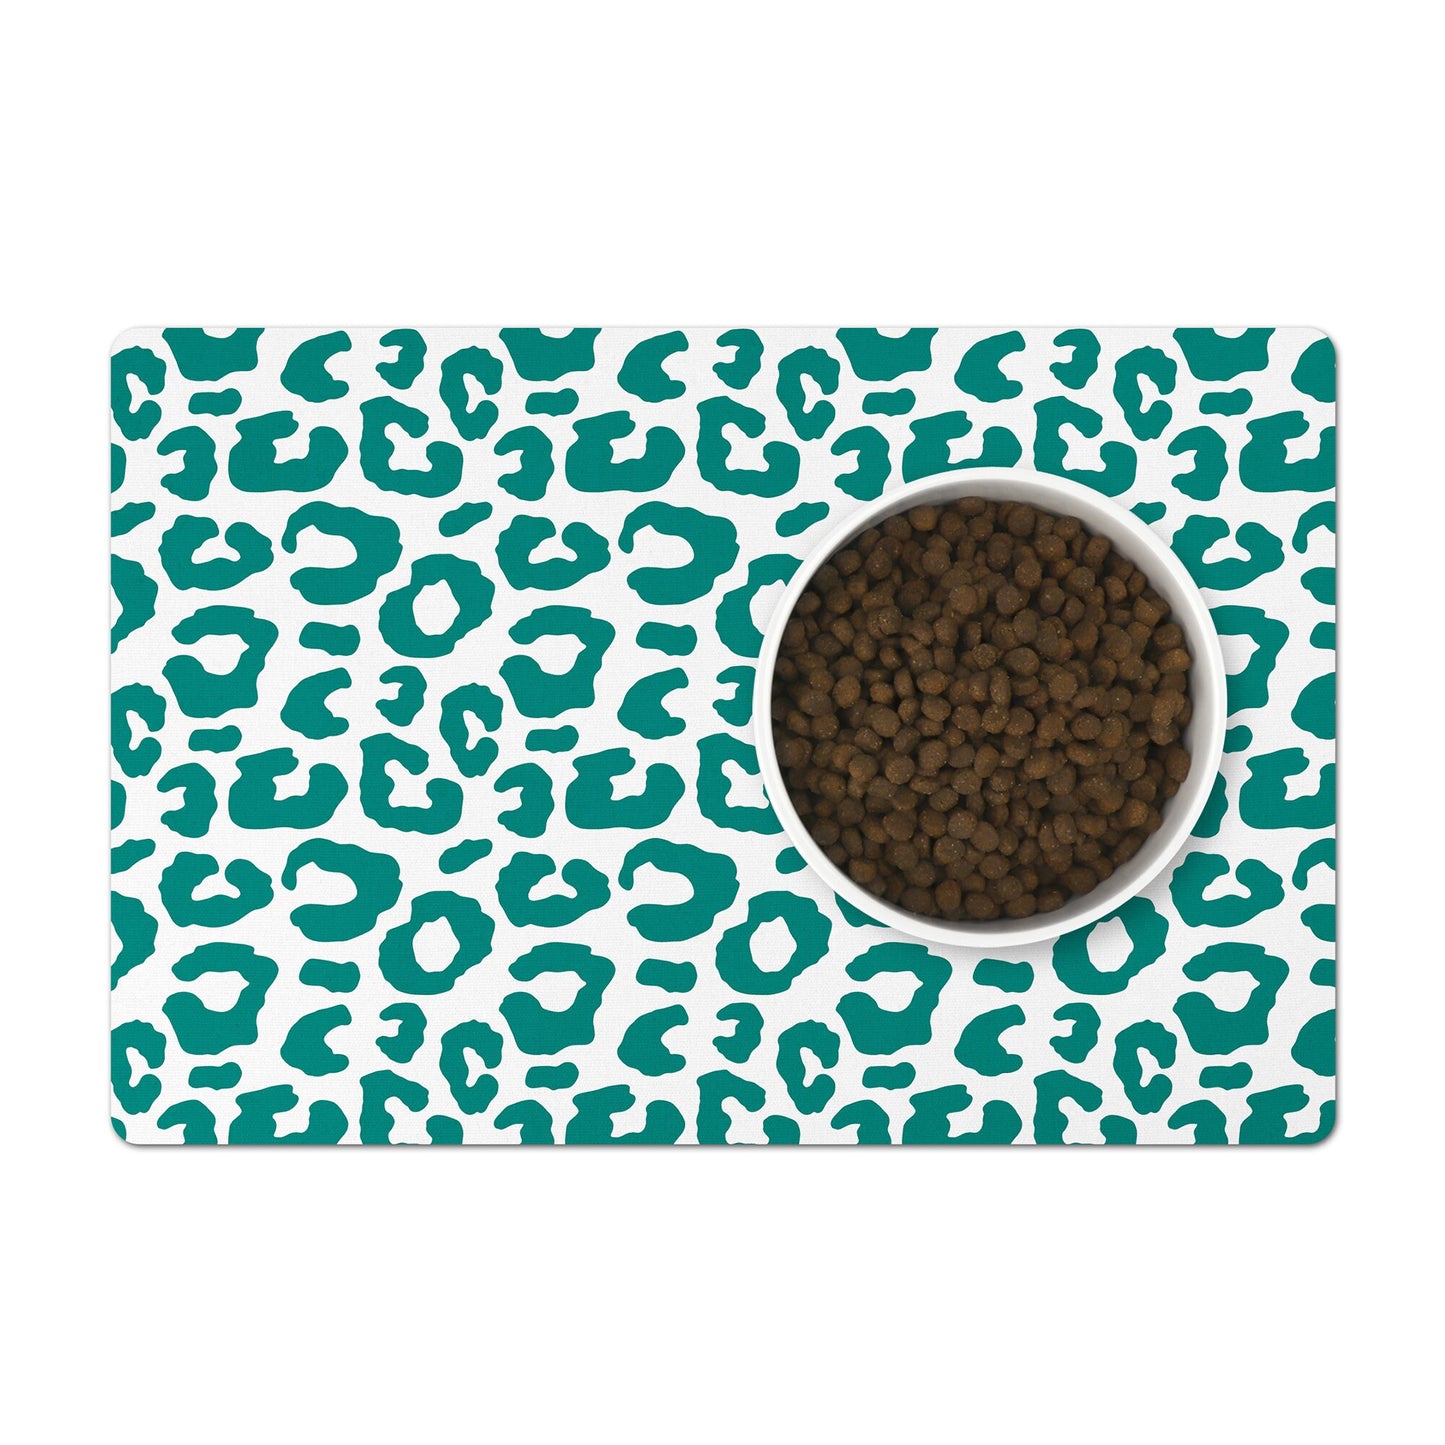 Pet Feeding Mat, Leopard Print, Teal and White